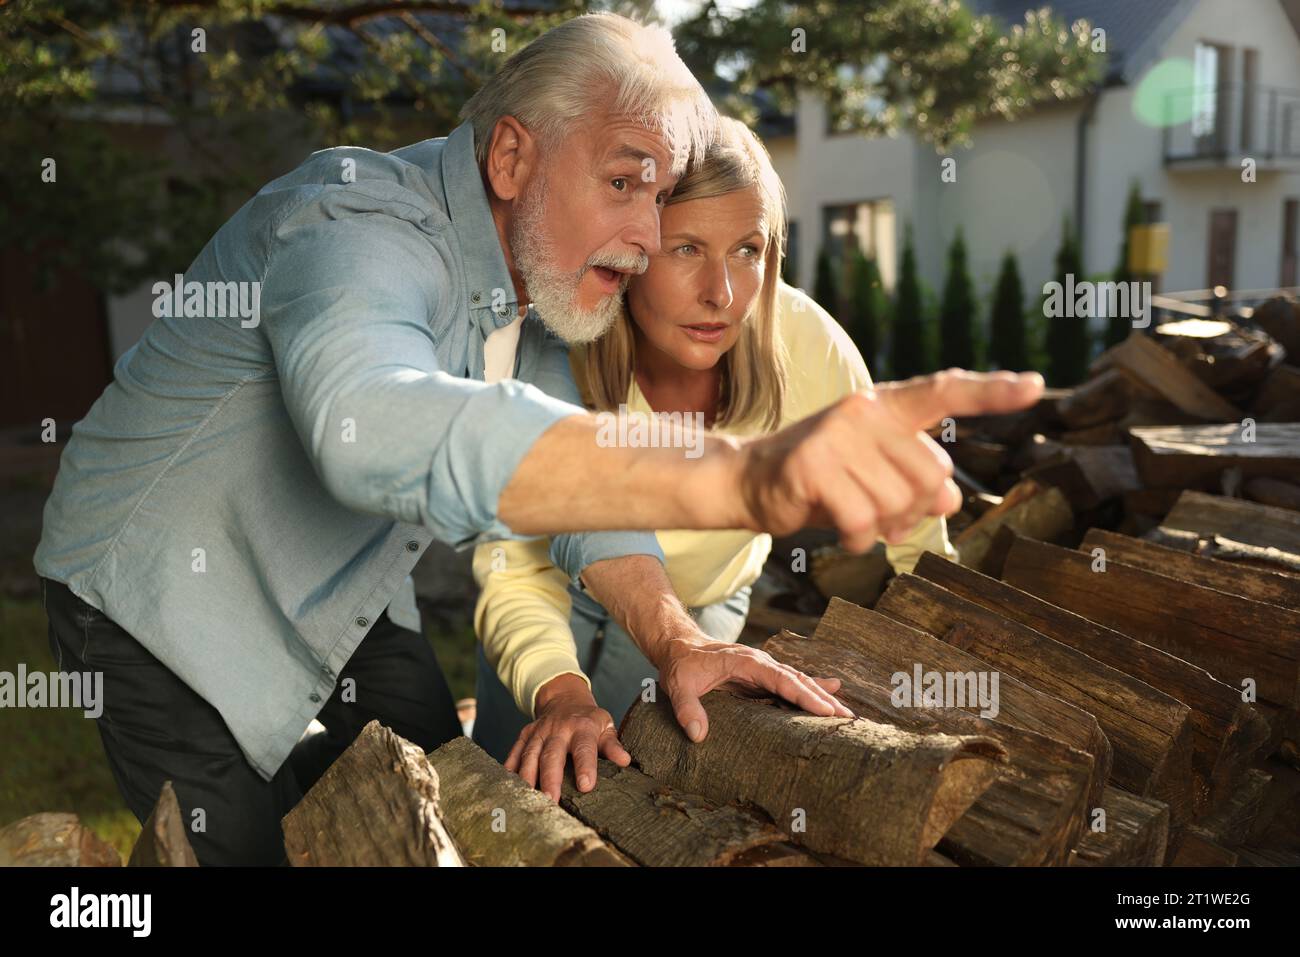 Concept of private life. Curious senior couple spying on neighbours over firewood outdoors Stock Photo